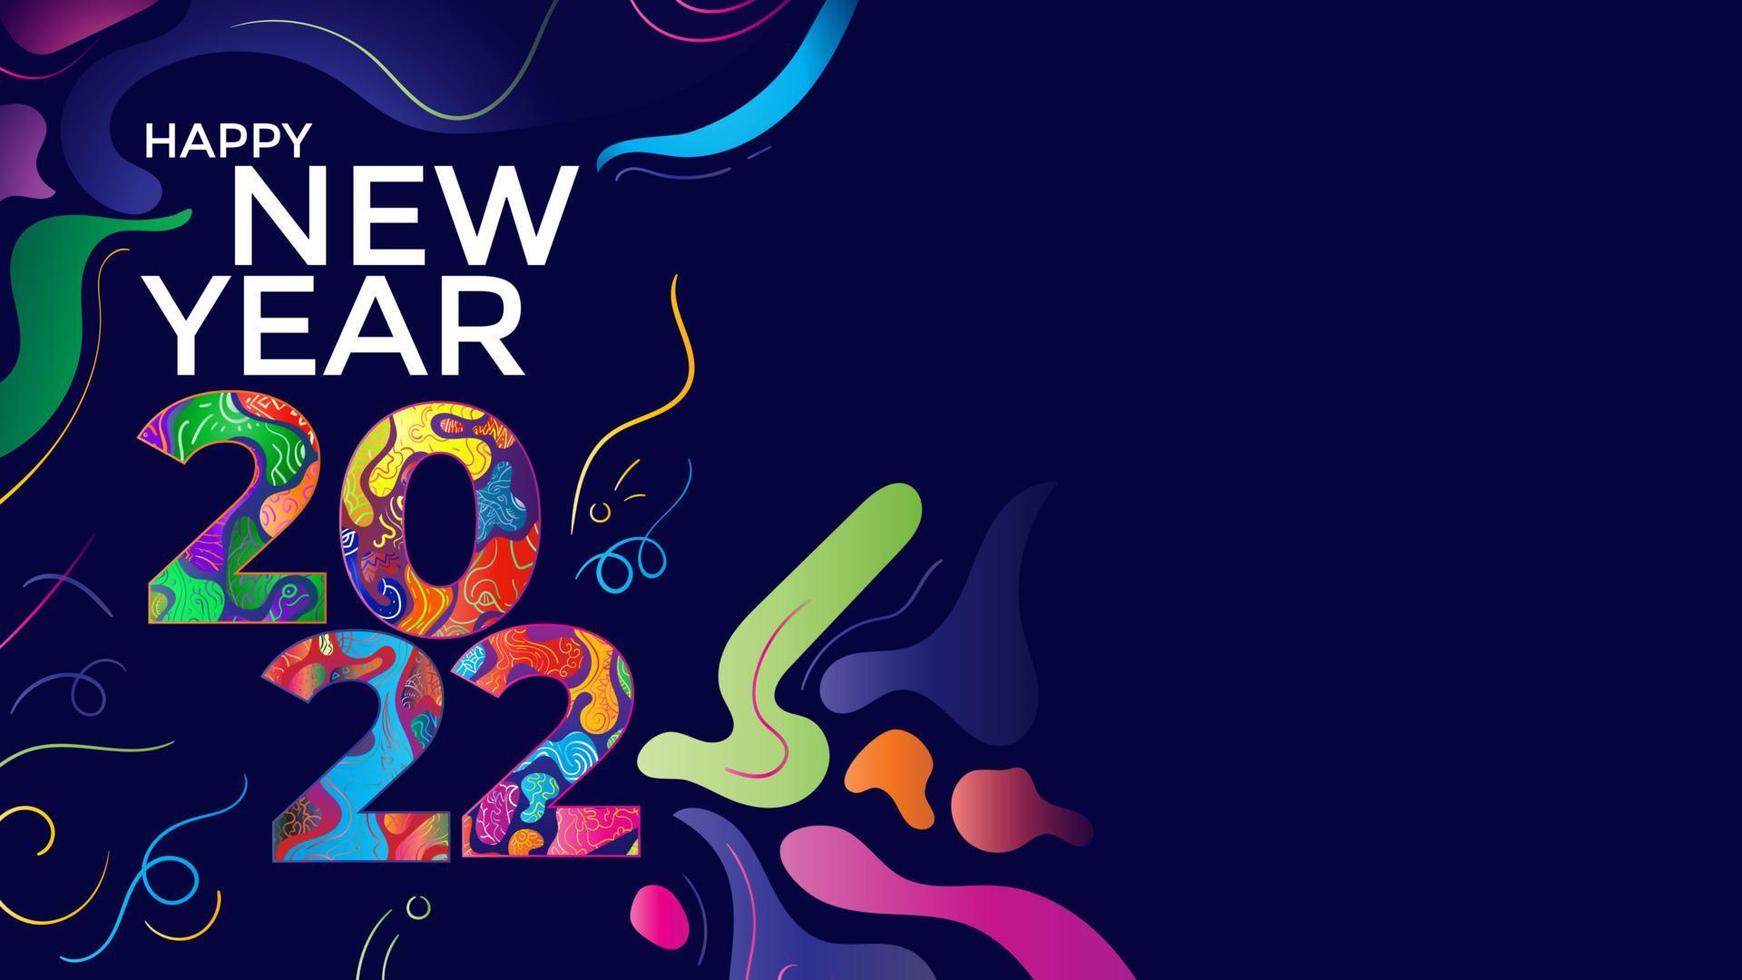 Happy new year 2022 doodle art background with copy space. Colorful fluid paint design. Trendy gradient shapes. Vector illustration.